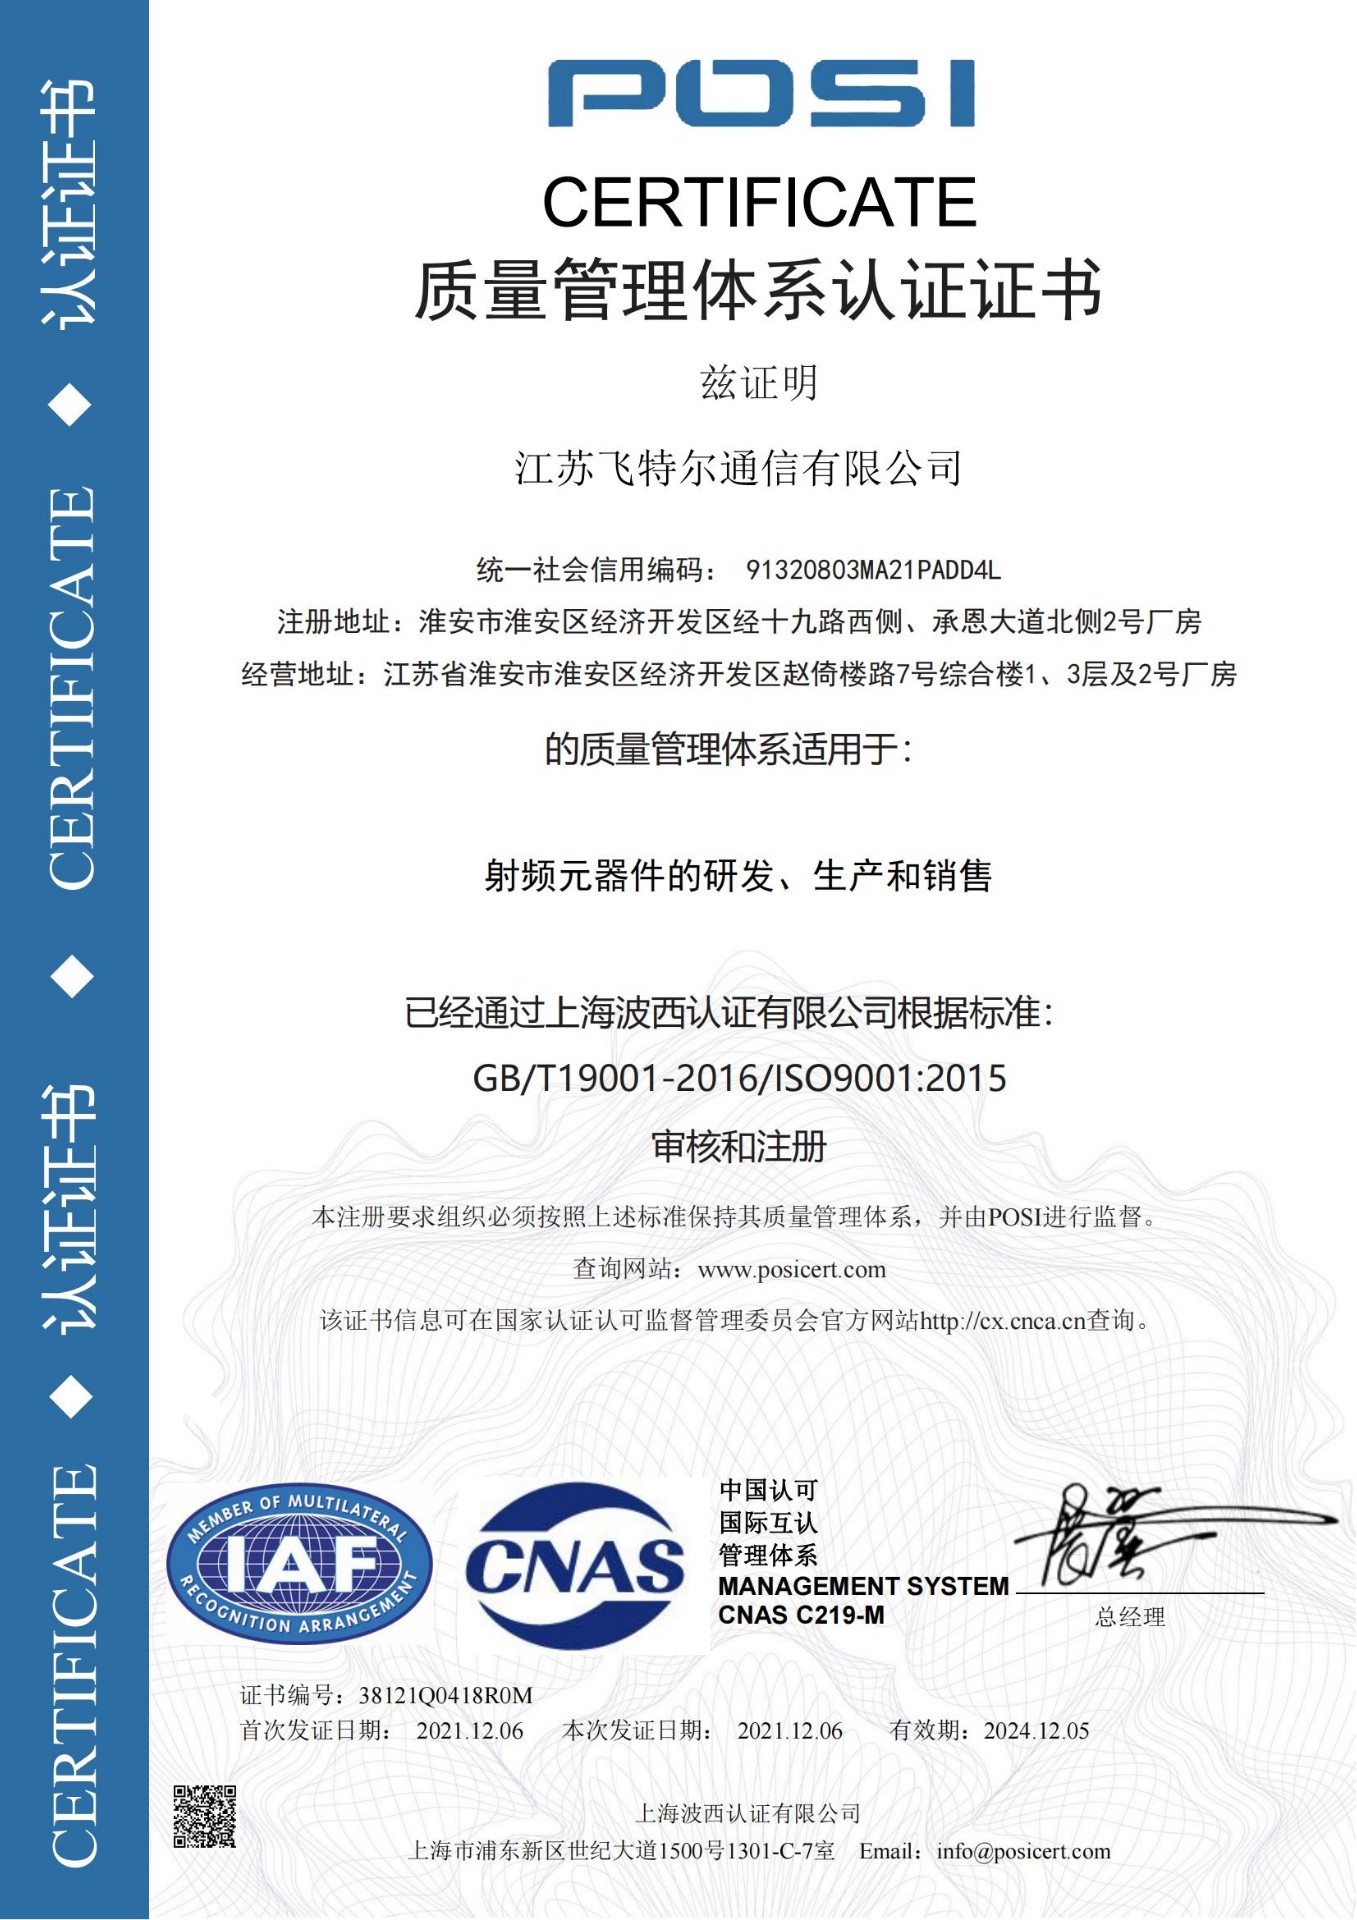 Our company has passed ISO9001 certification